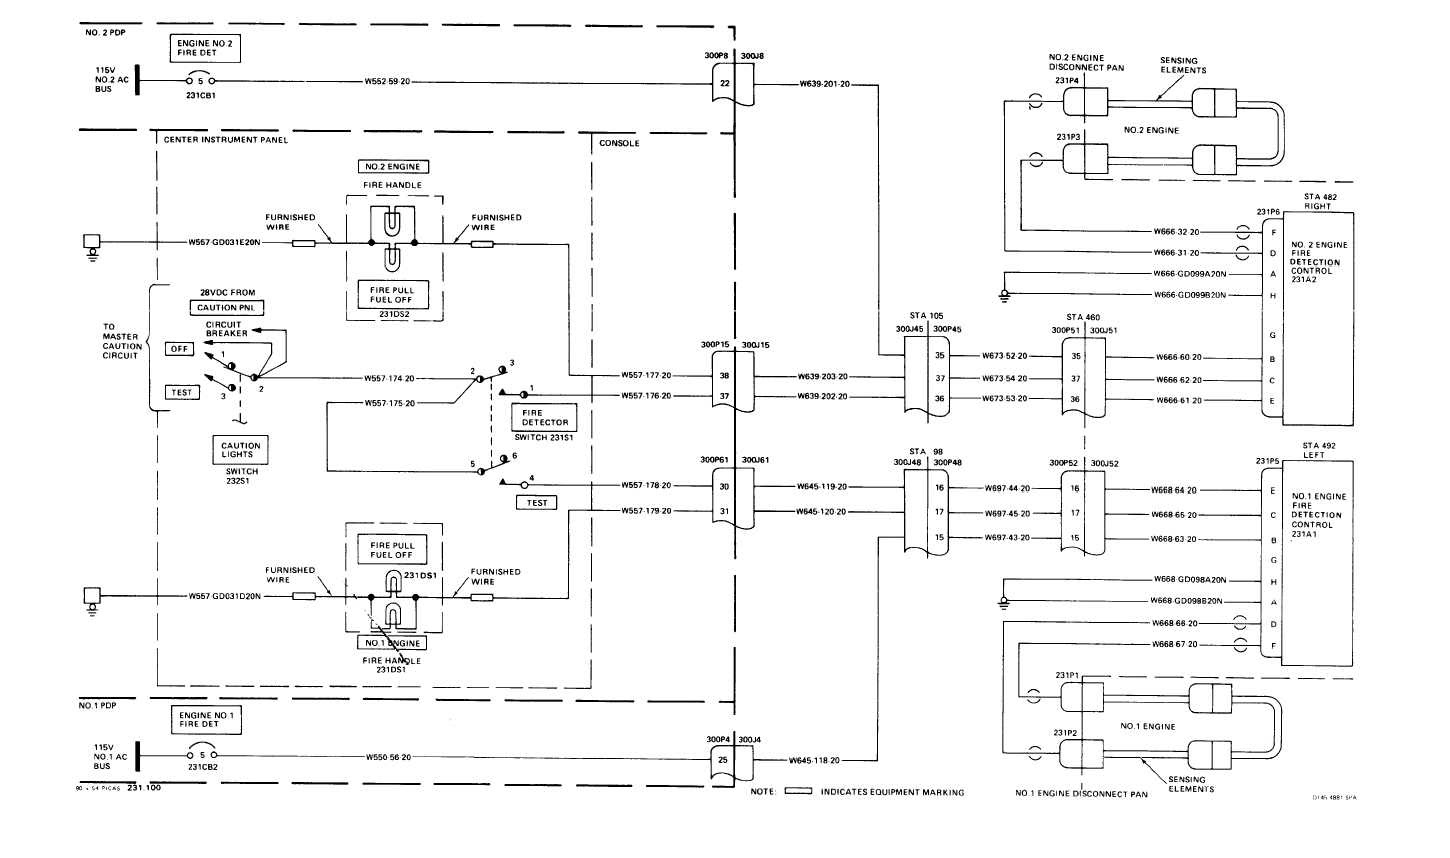 ... 55-1520-240-T 12-2.2 12-2.2 FIRE DETECTION SYSTEM WIRING DIAGRAM 12-31